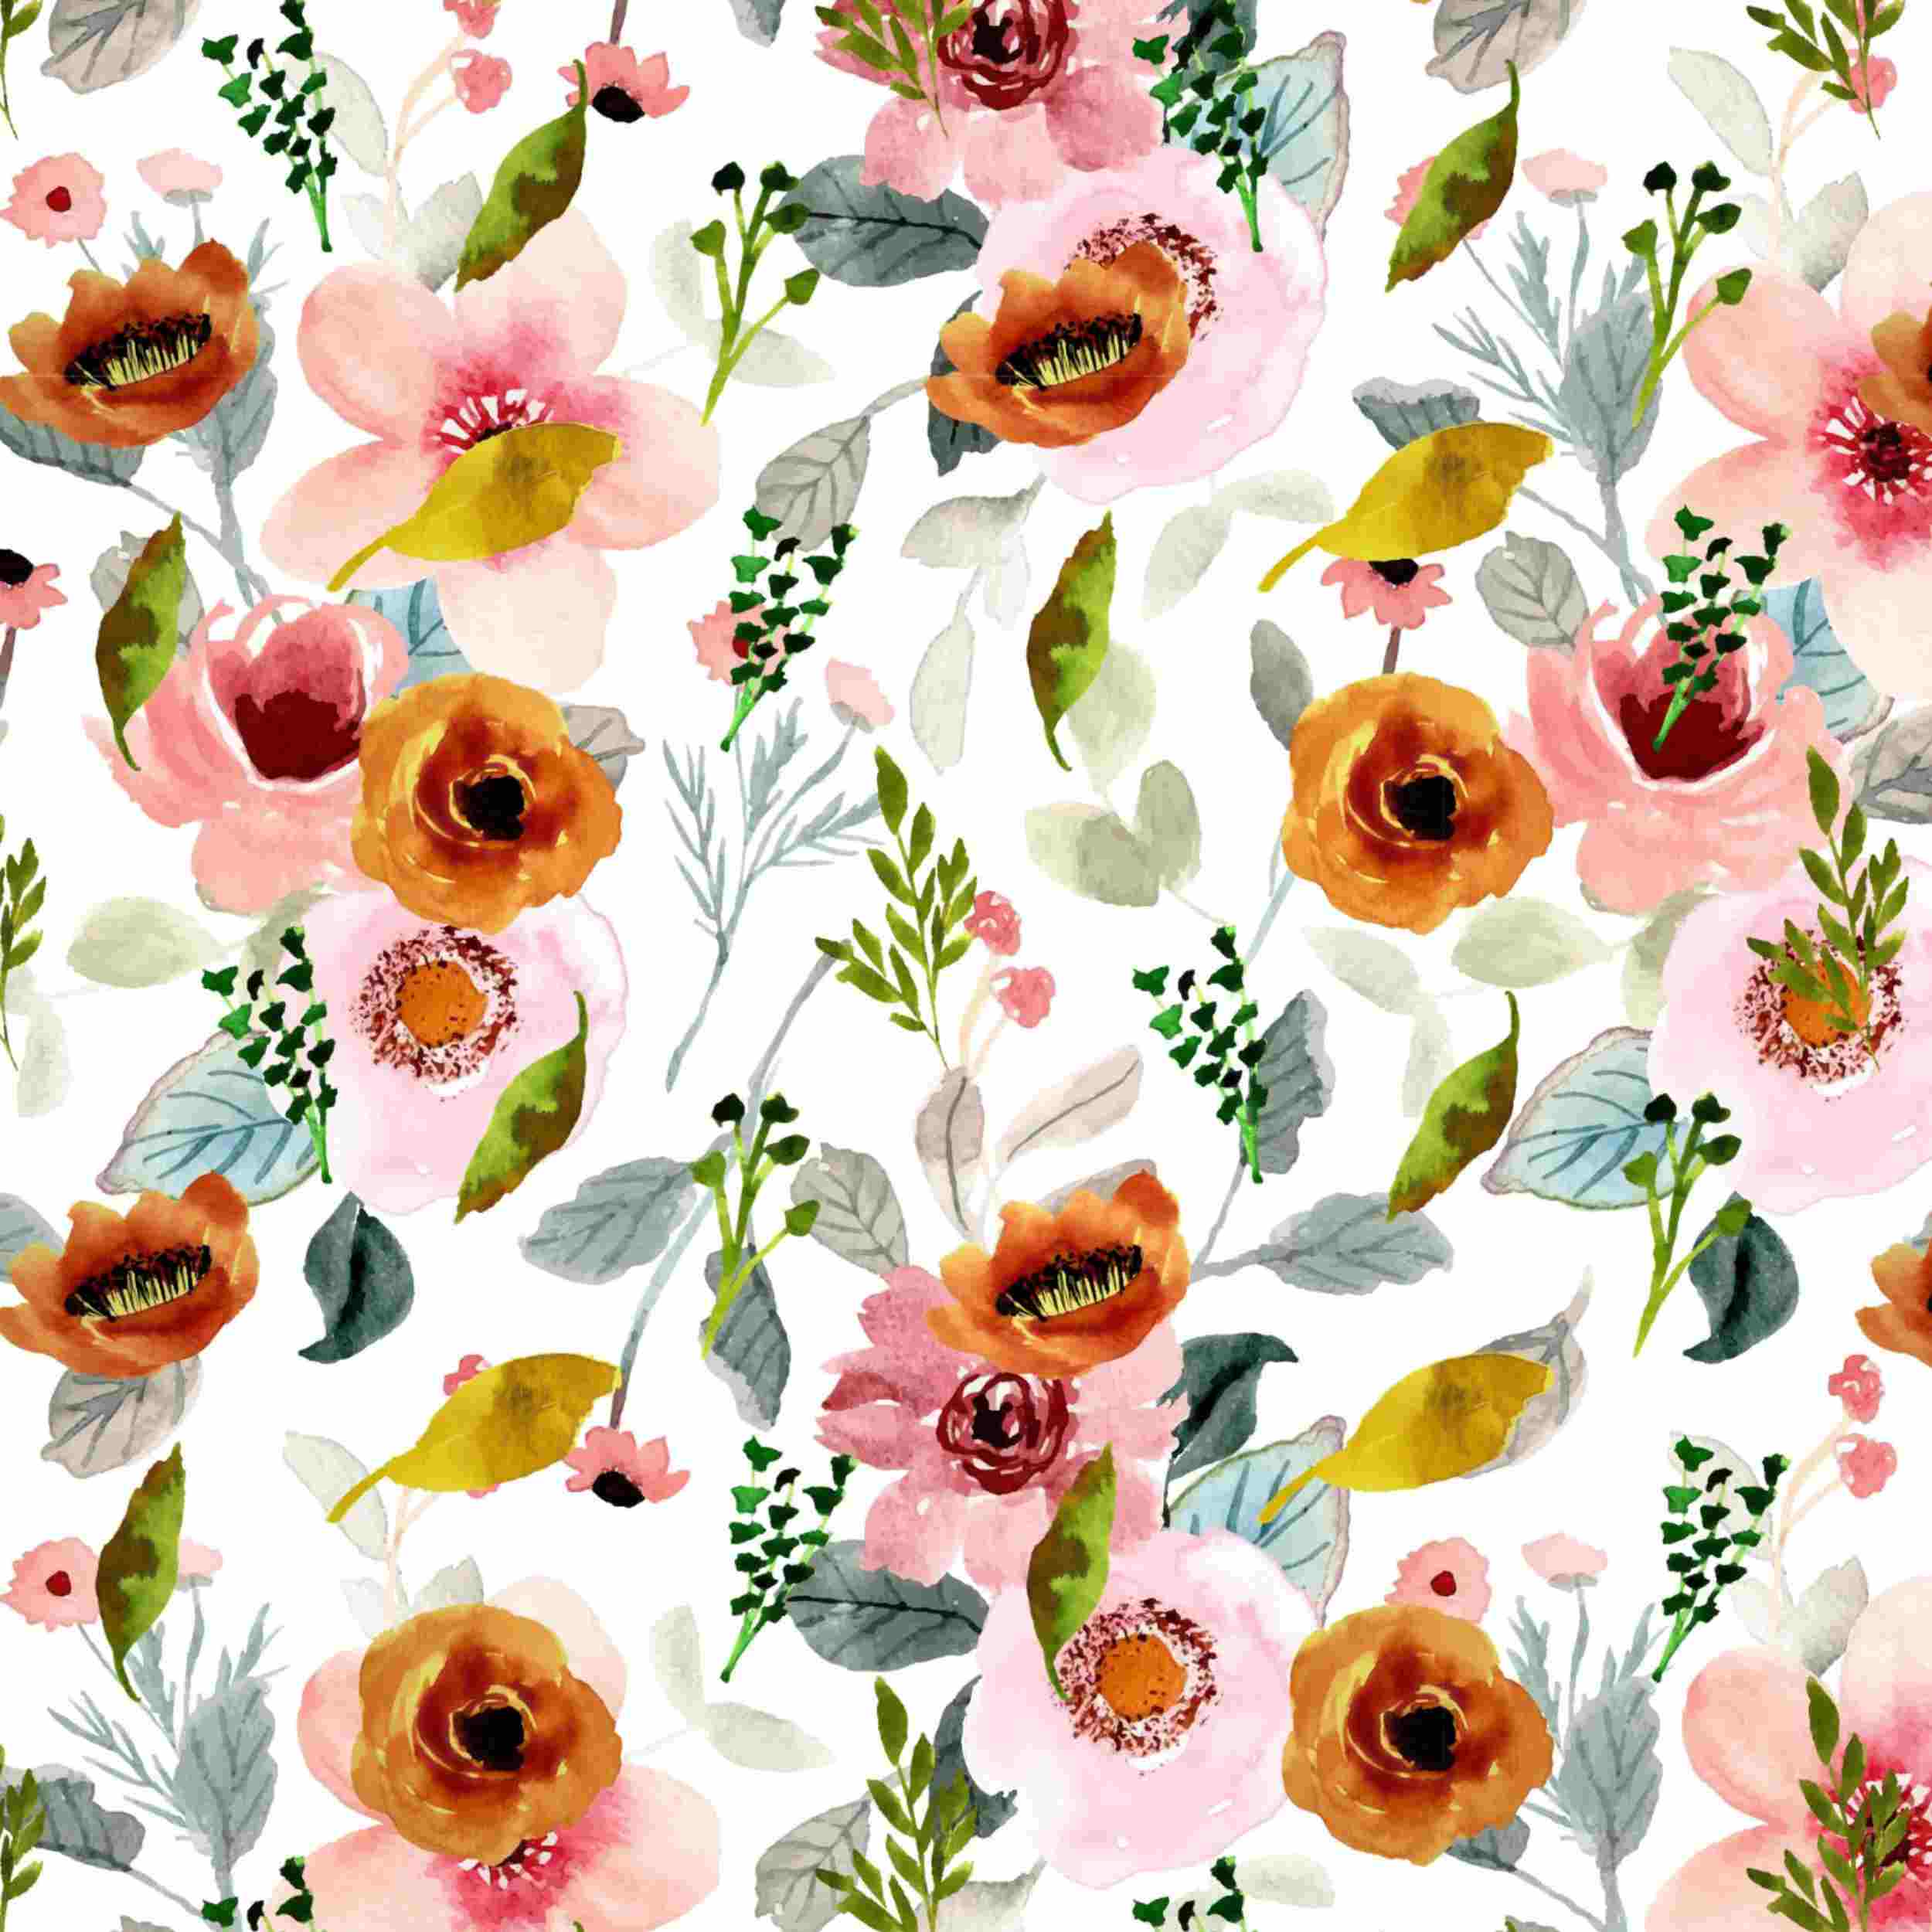 Flowers pattern set preview image.